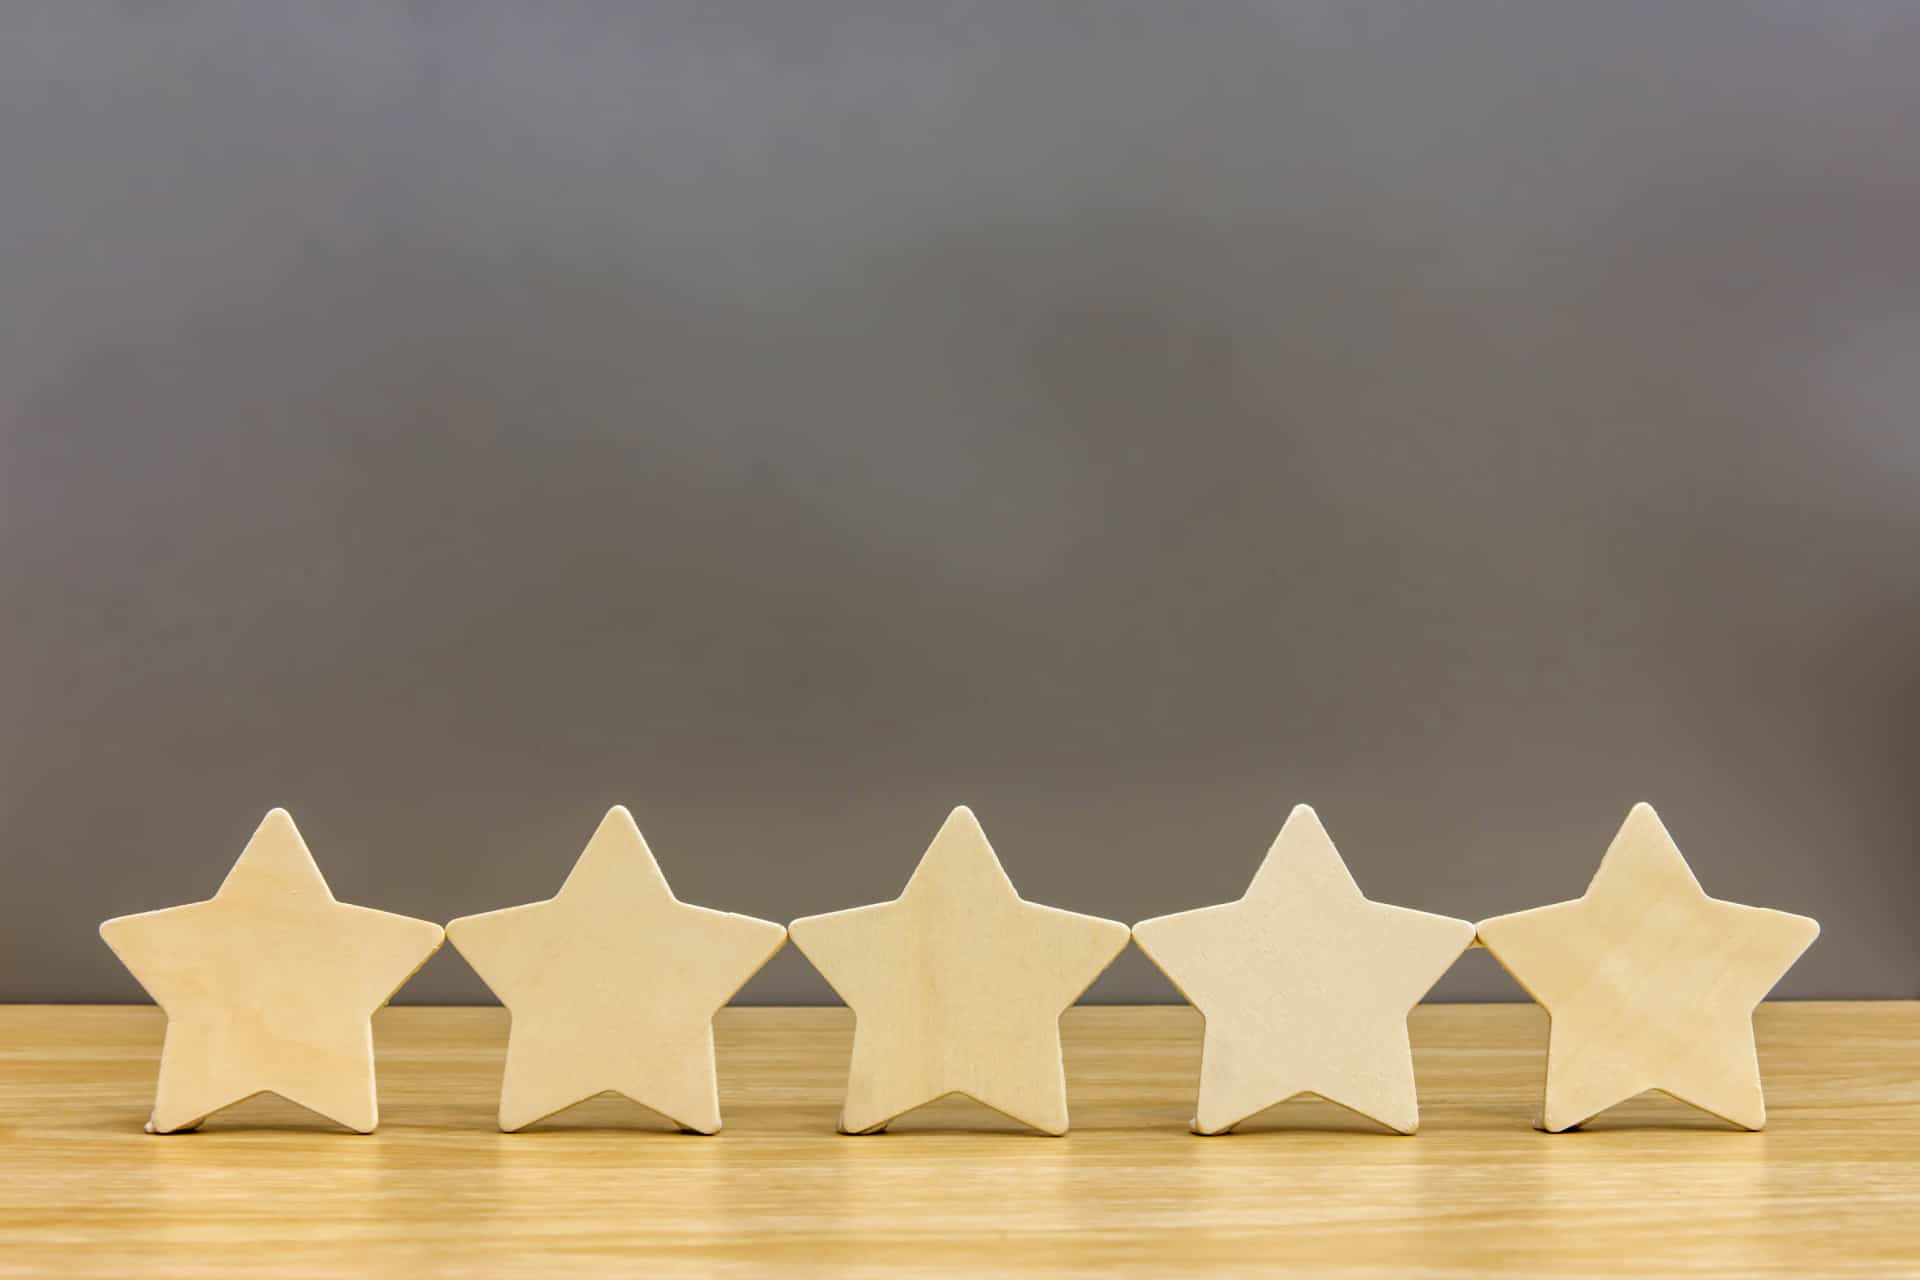 Five stars lined up on a tabletop, indicating high quality.